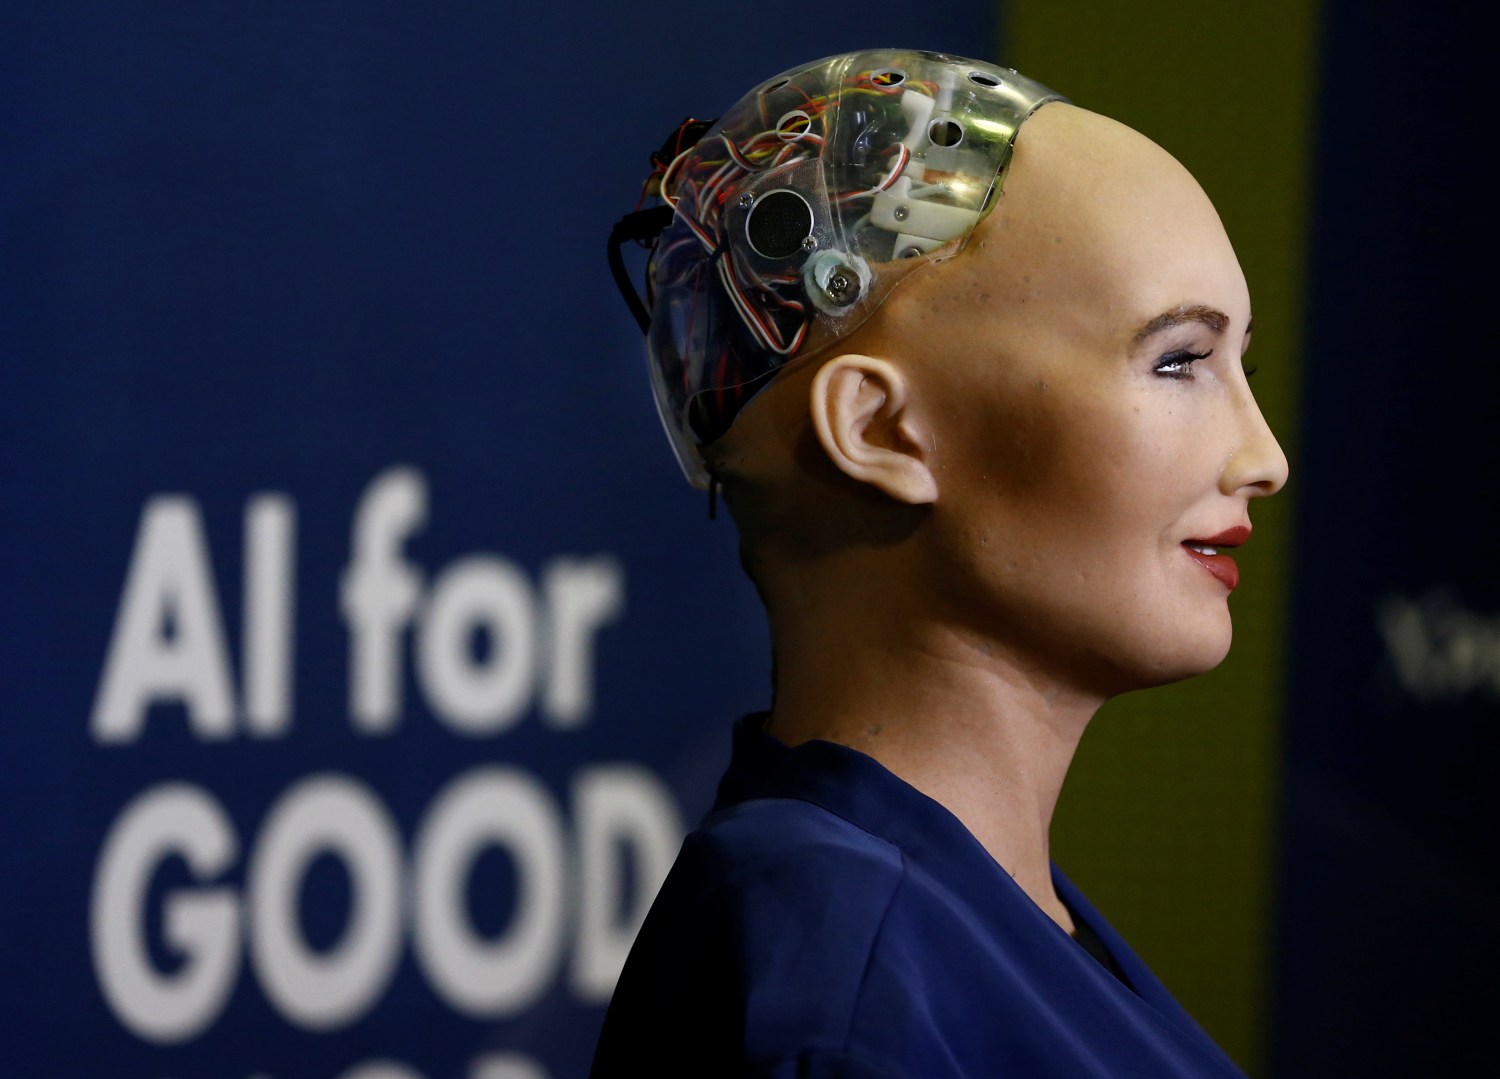 Sophia, a robot integrating the latest technologies and artificial intelligence developed by Hanson Robotics is pictured during a presentation at the "AI for Good" Global Summit at the International Telecommunication Union (ITU) in Geneva, Switzerland June 7, 2017. REUTERS/Denis Balibouse - RC161DD14970